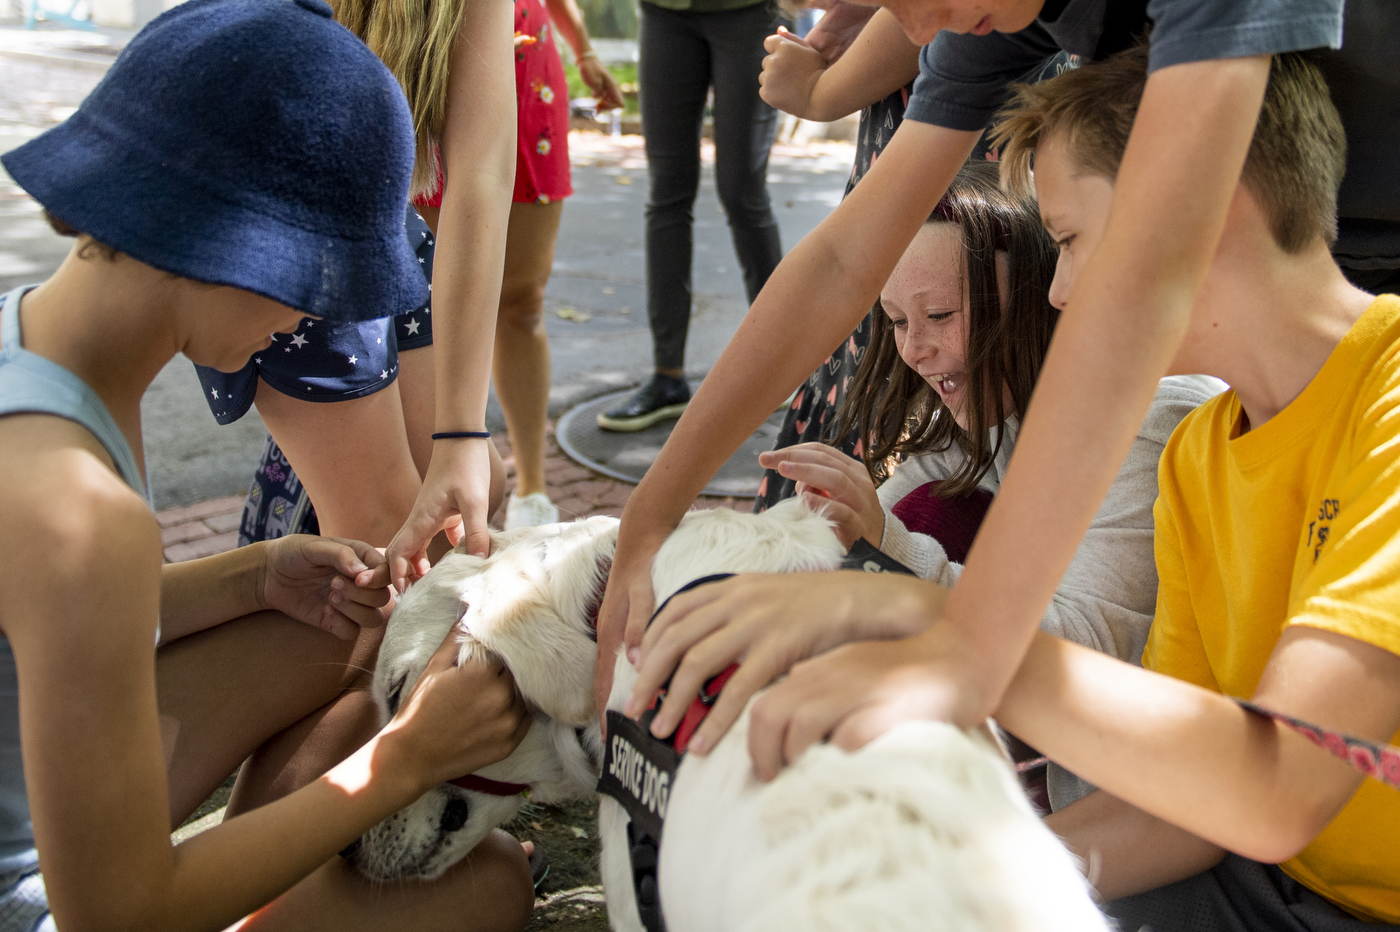 Children excitedly petting a service dog